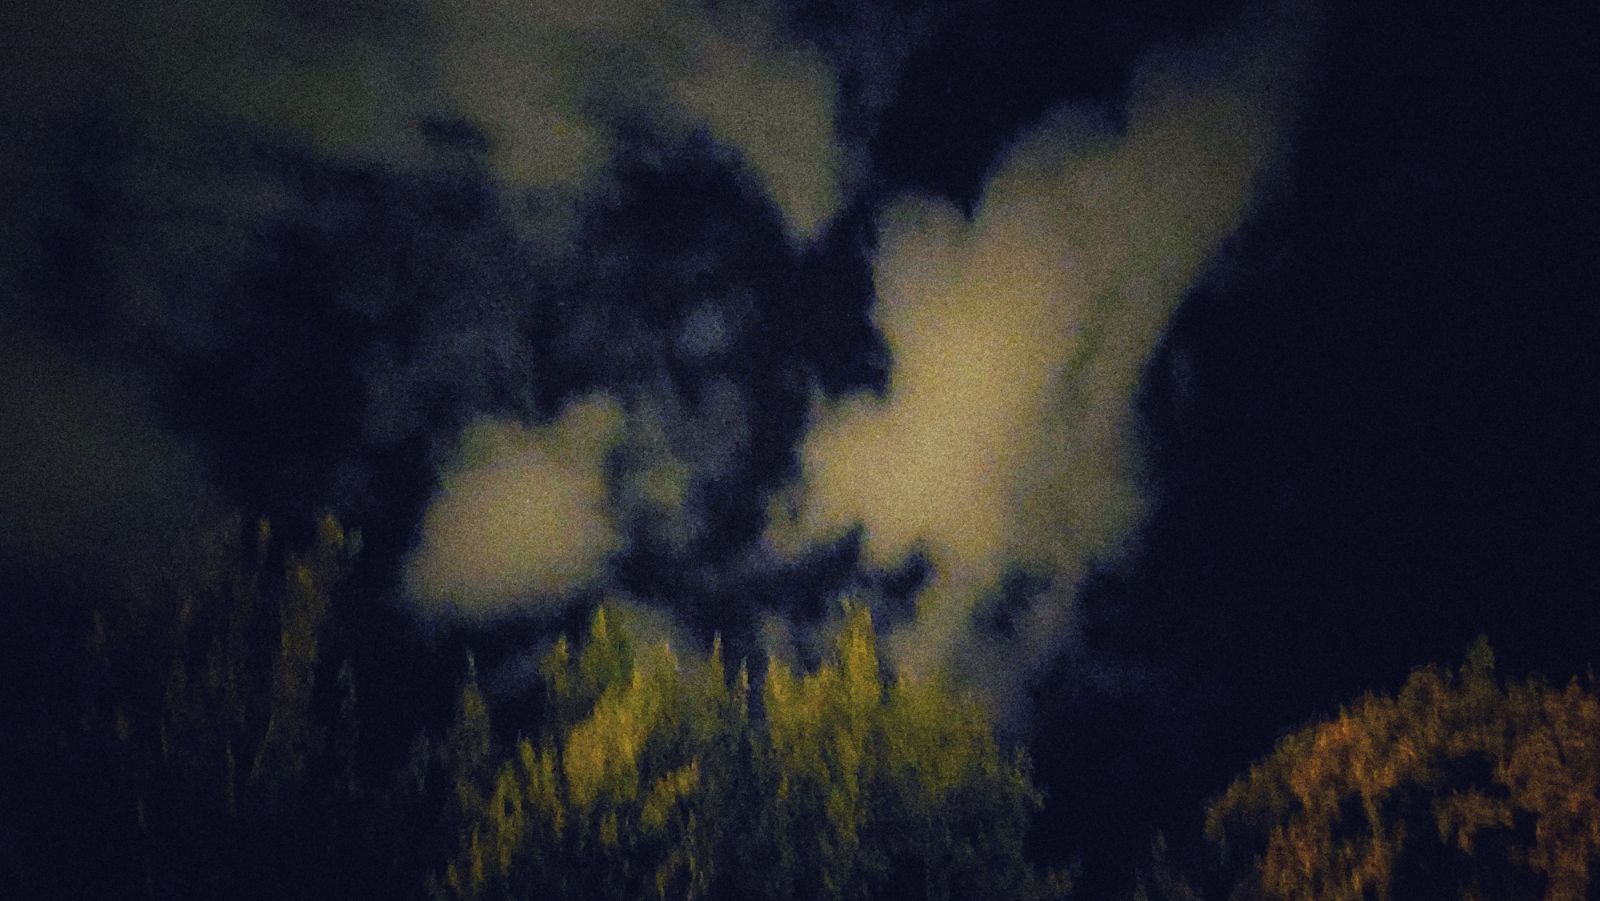 Overexposed night shot. Dark sky, clouds, and a blurred bunch of trees.